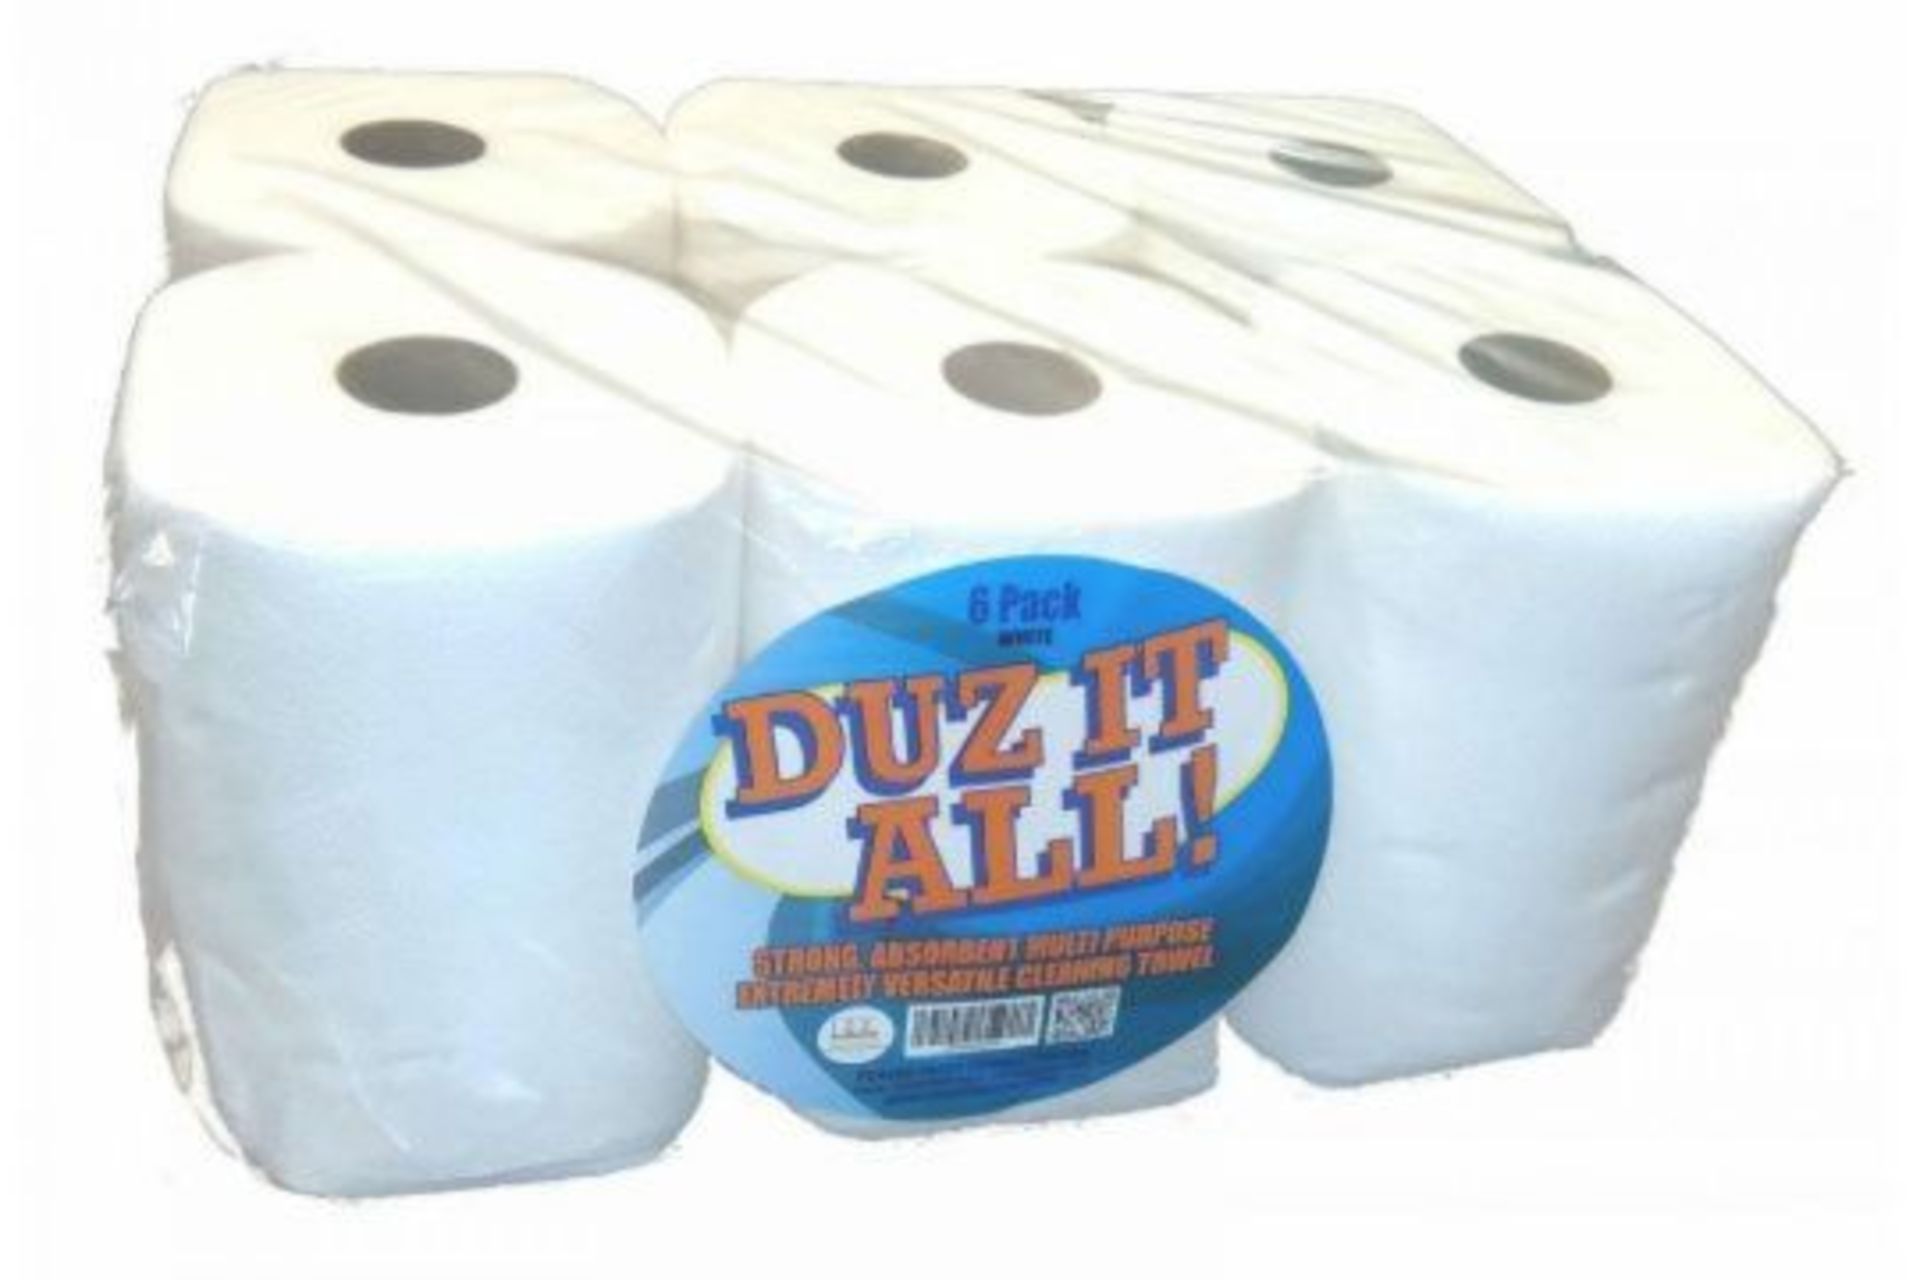 BRAND NEW X6 LARGE WHITE DUZ IT ALL MULTIPURPOSE CLEANING TISSUE